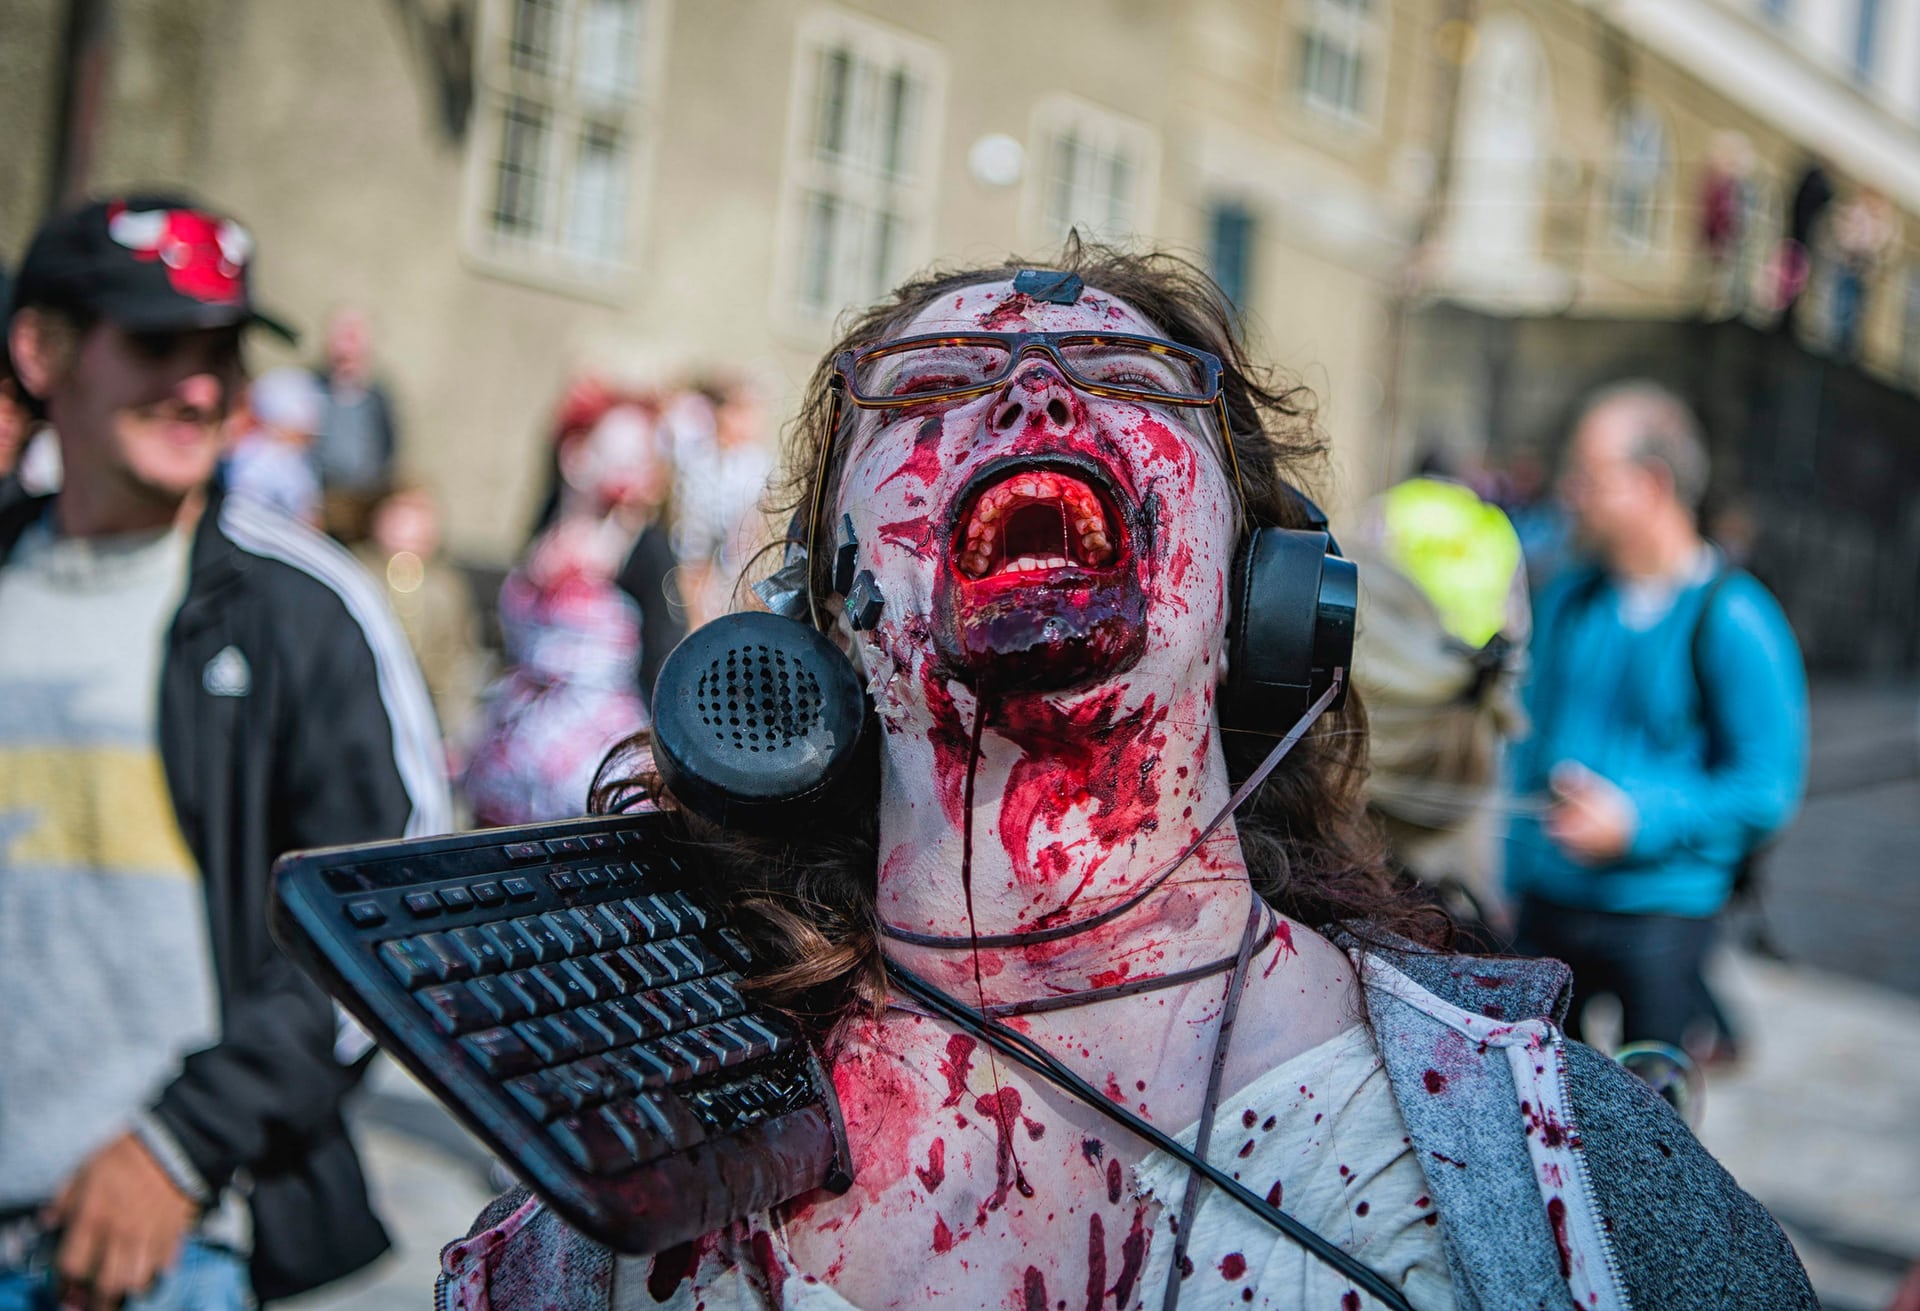 A woman dressed up as a zombie participates in a zombie walk, Stockholm, Sweden. PHOTO: AFP